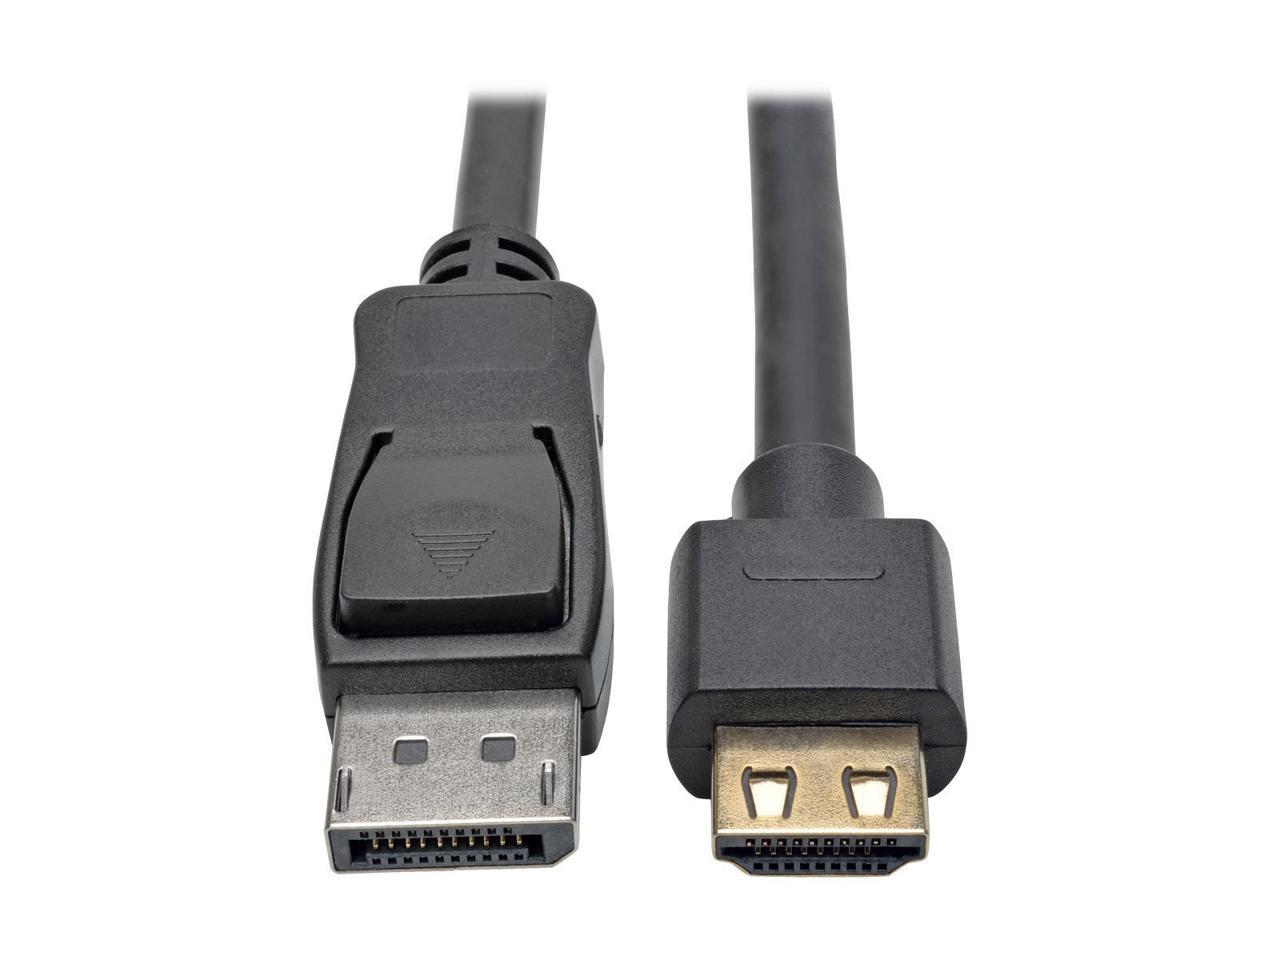 Tripp Lite DisplayPort to HDMI Adapter Cable Active DP 1.2a to HDMI 4K 15 ft. (P582-015-HD-V2A)